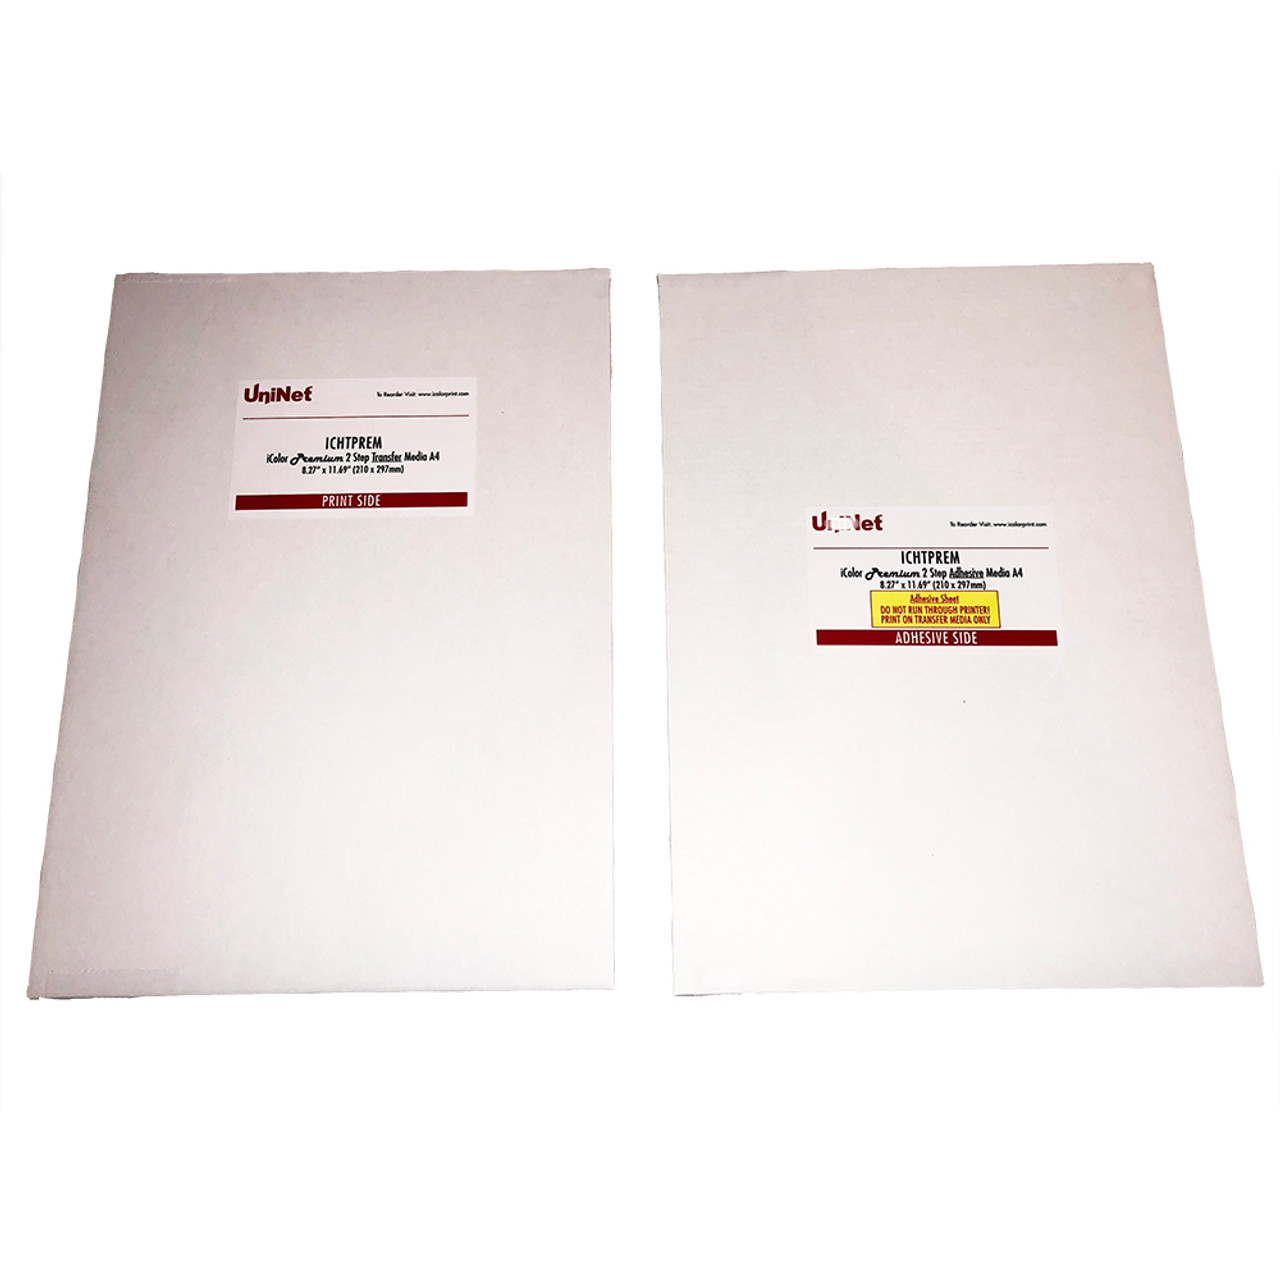 Uninet iColor Easy Tattoo Transfer Paper - 8.27 x 11.69 - 100 Pack